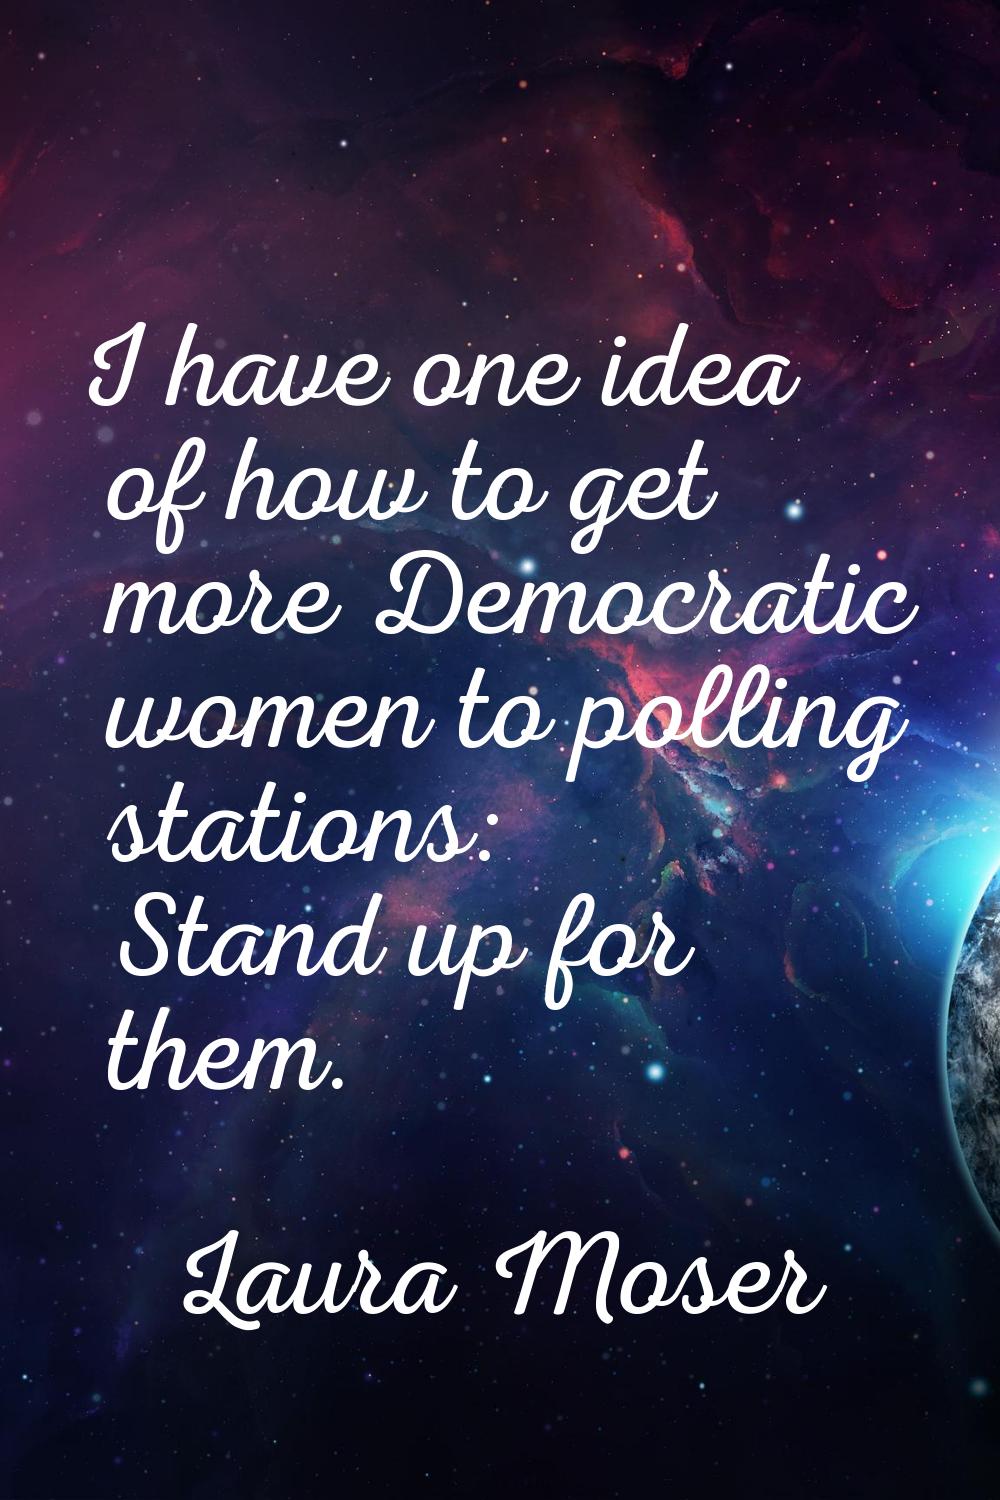 I have one idea of how to get more Democratic women to polling stations: Stand up for them.